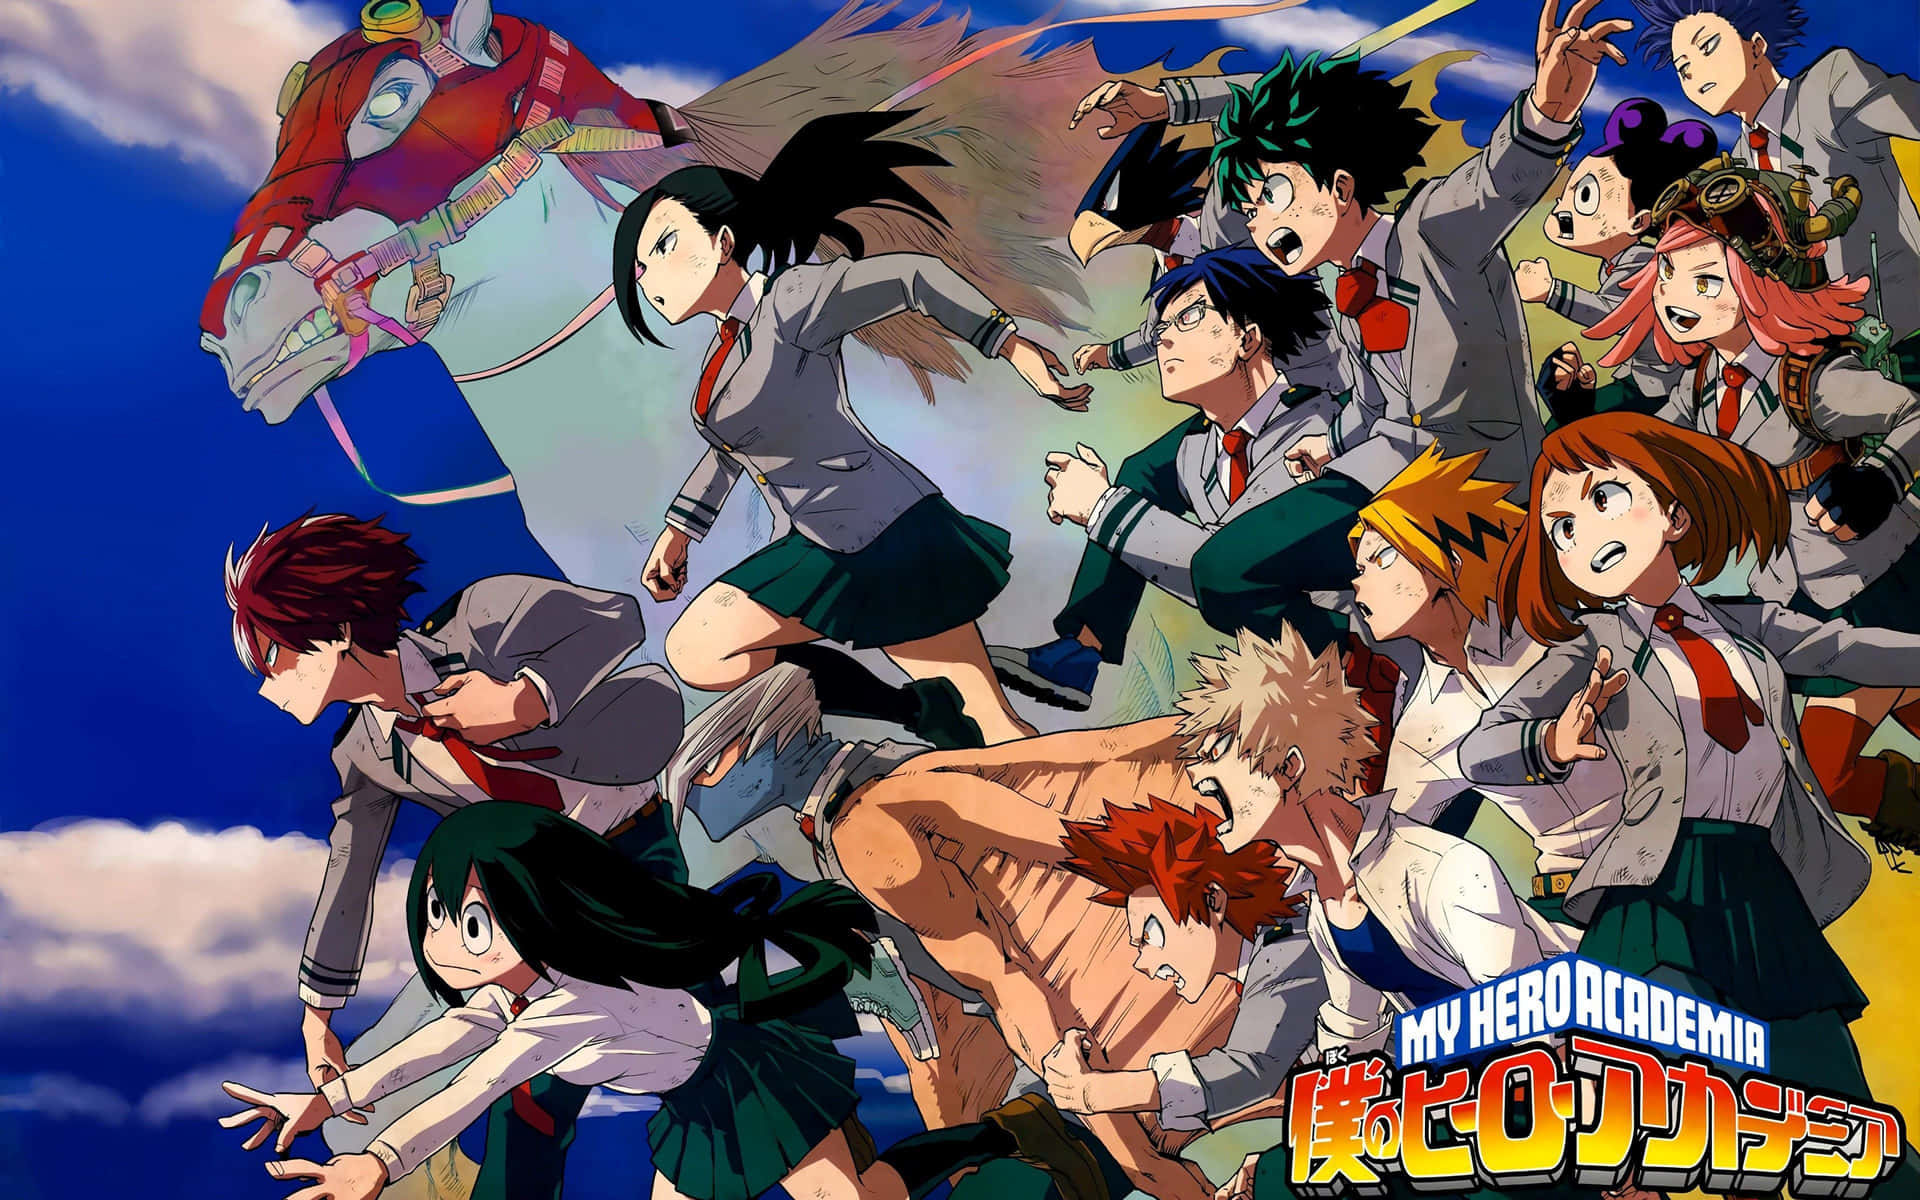 Improve your anime gaming experience on My Hero Academia Wallpaper